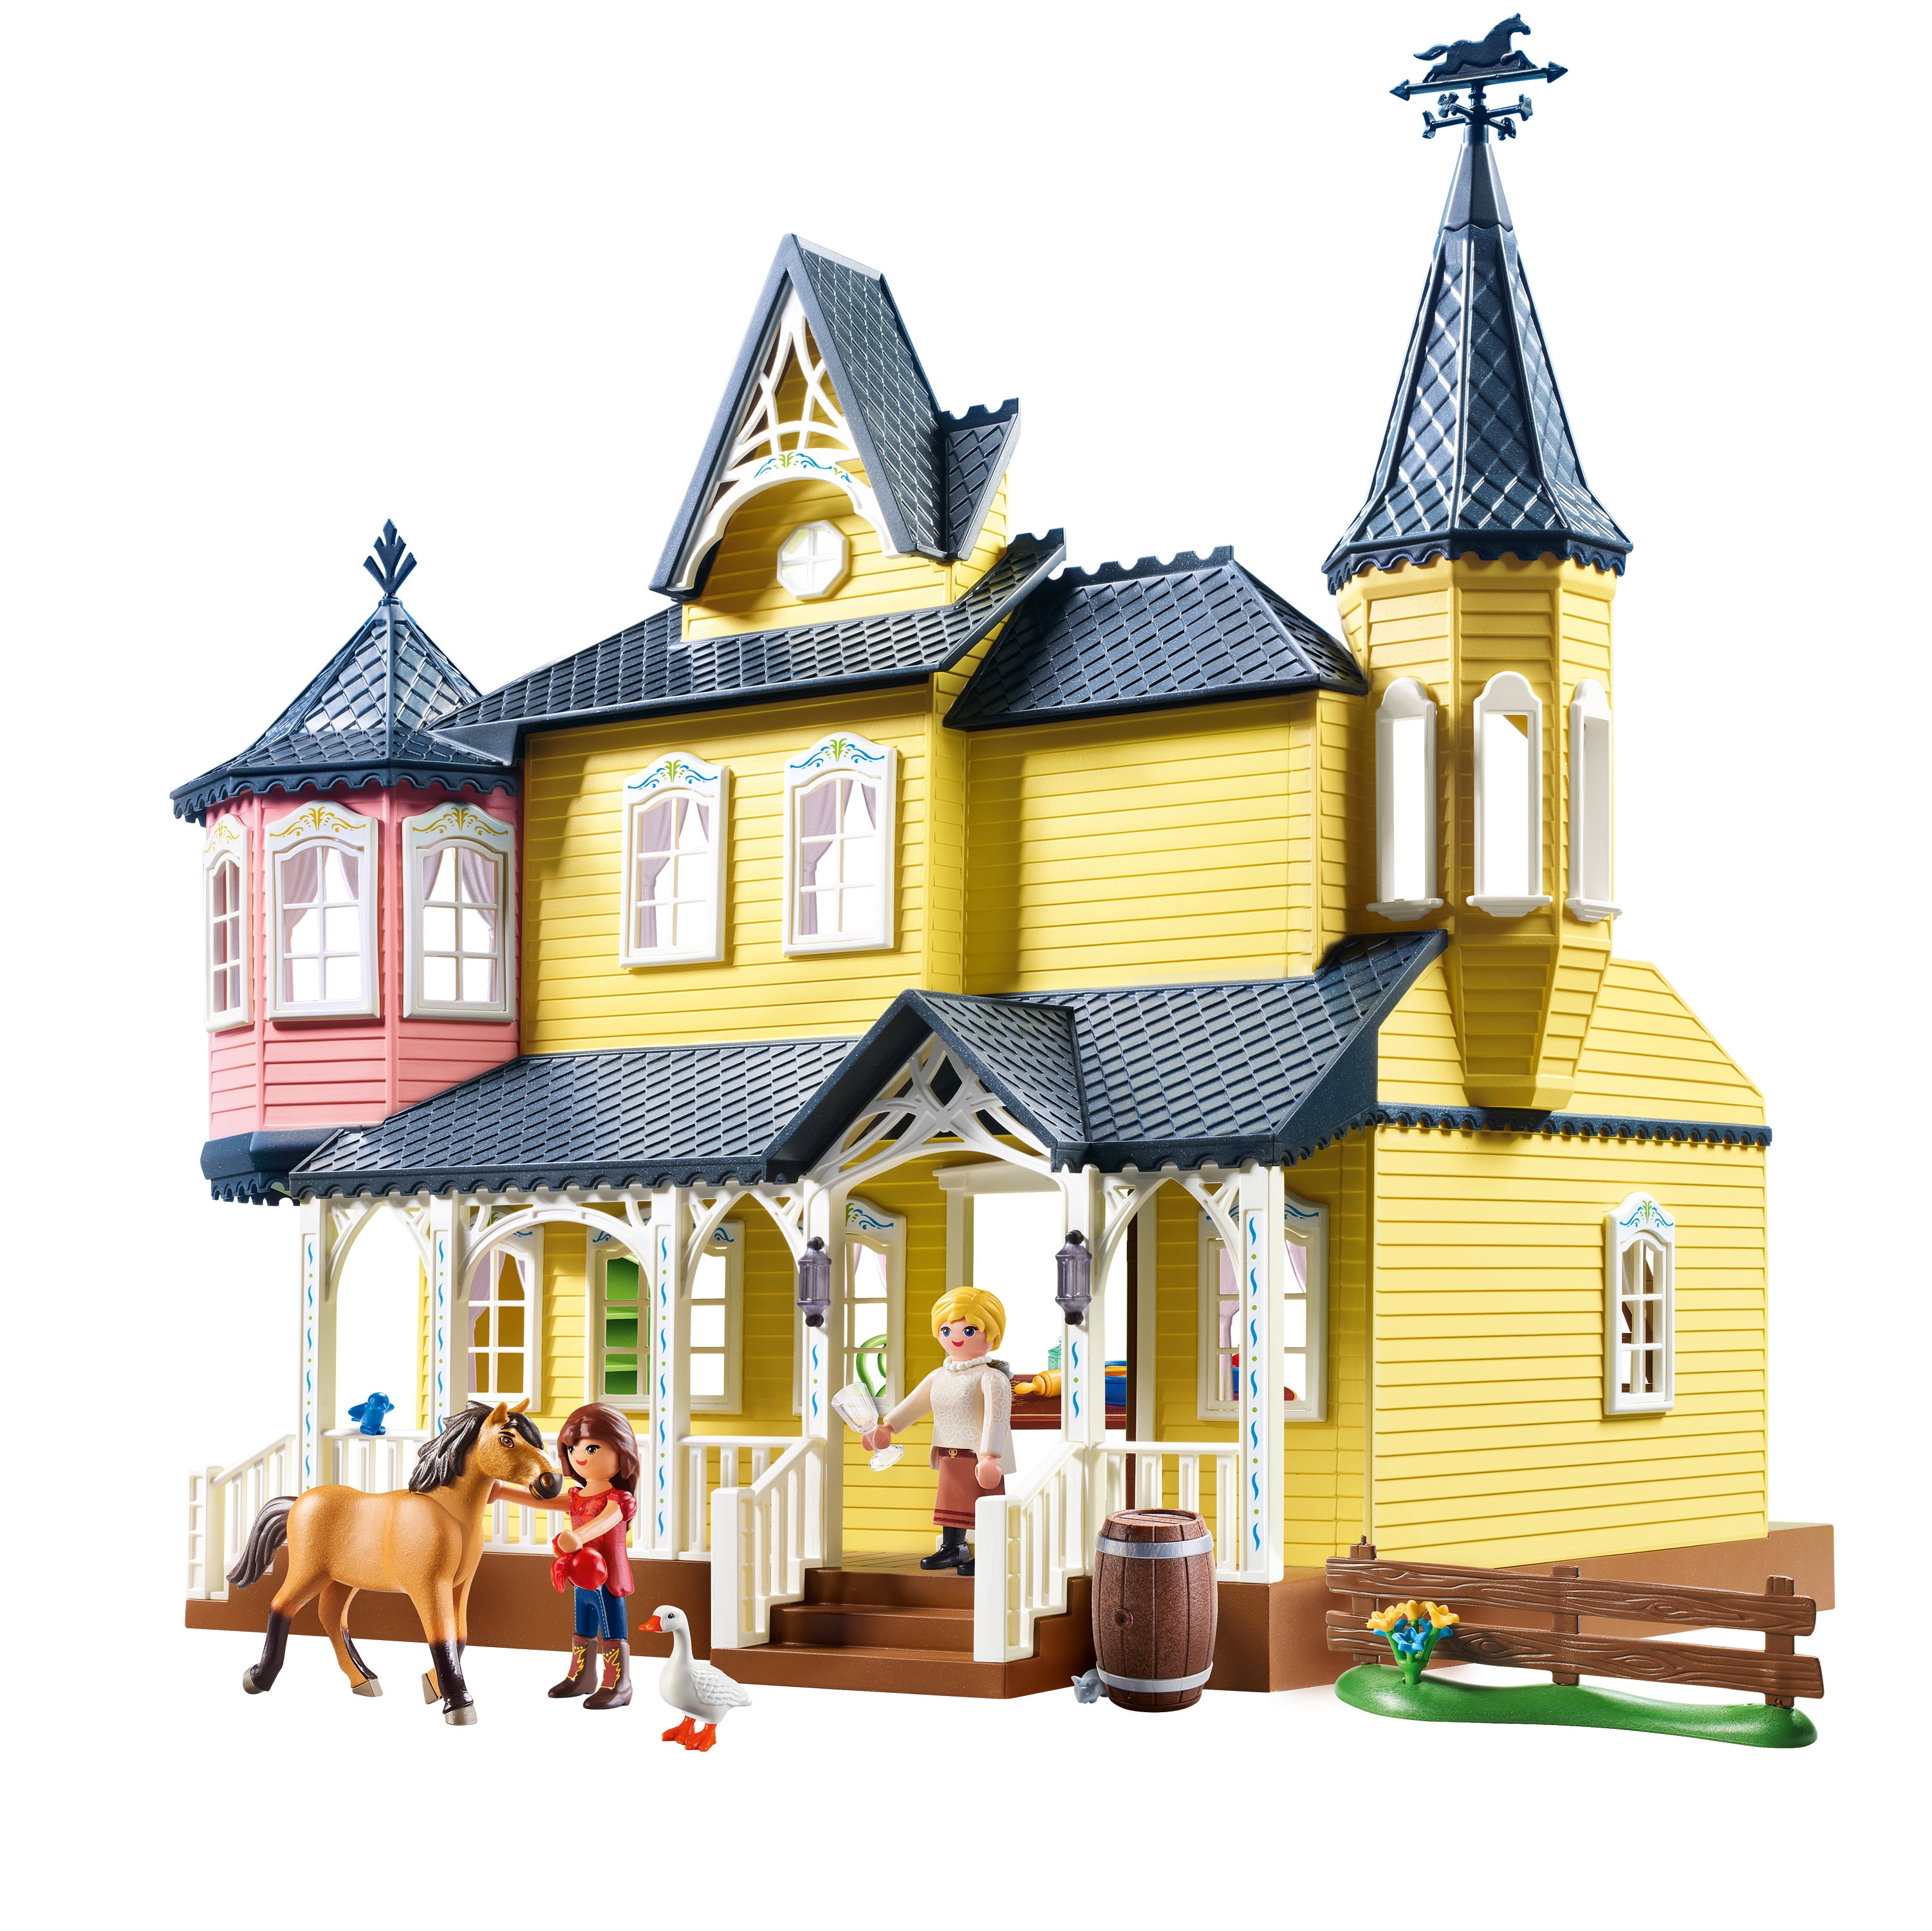 PLAYMOBIL Dreamworks Spirit Riding Arena With Lucky and Javier 70119 57pcs for sale online 